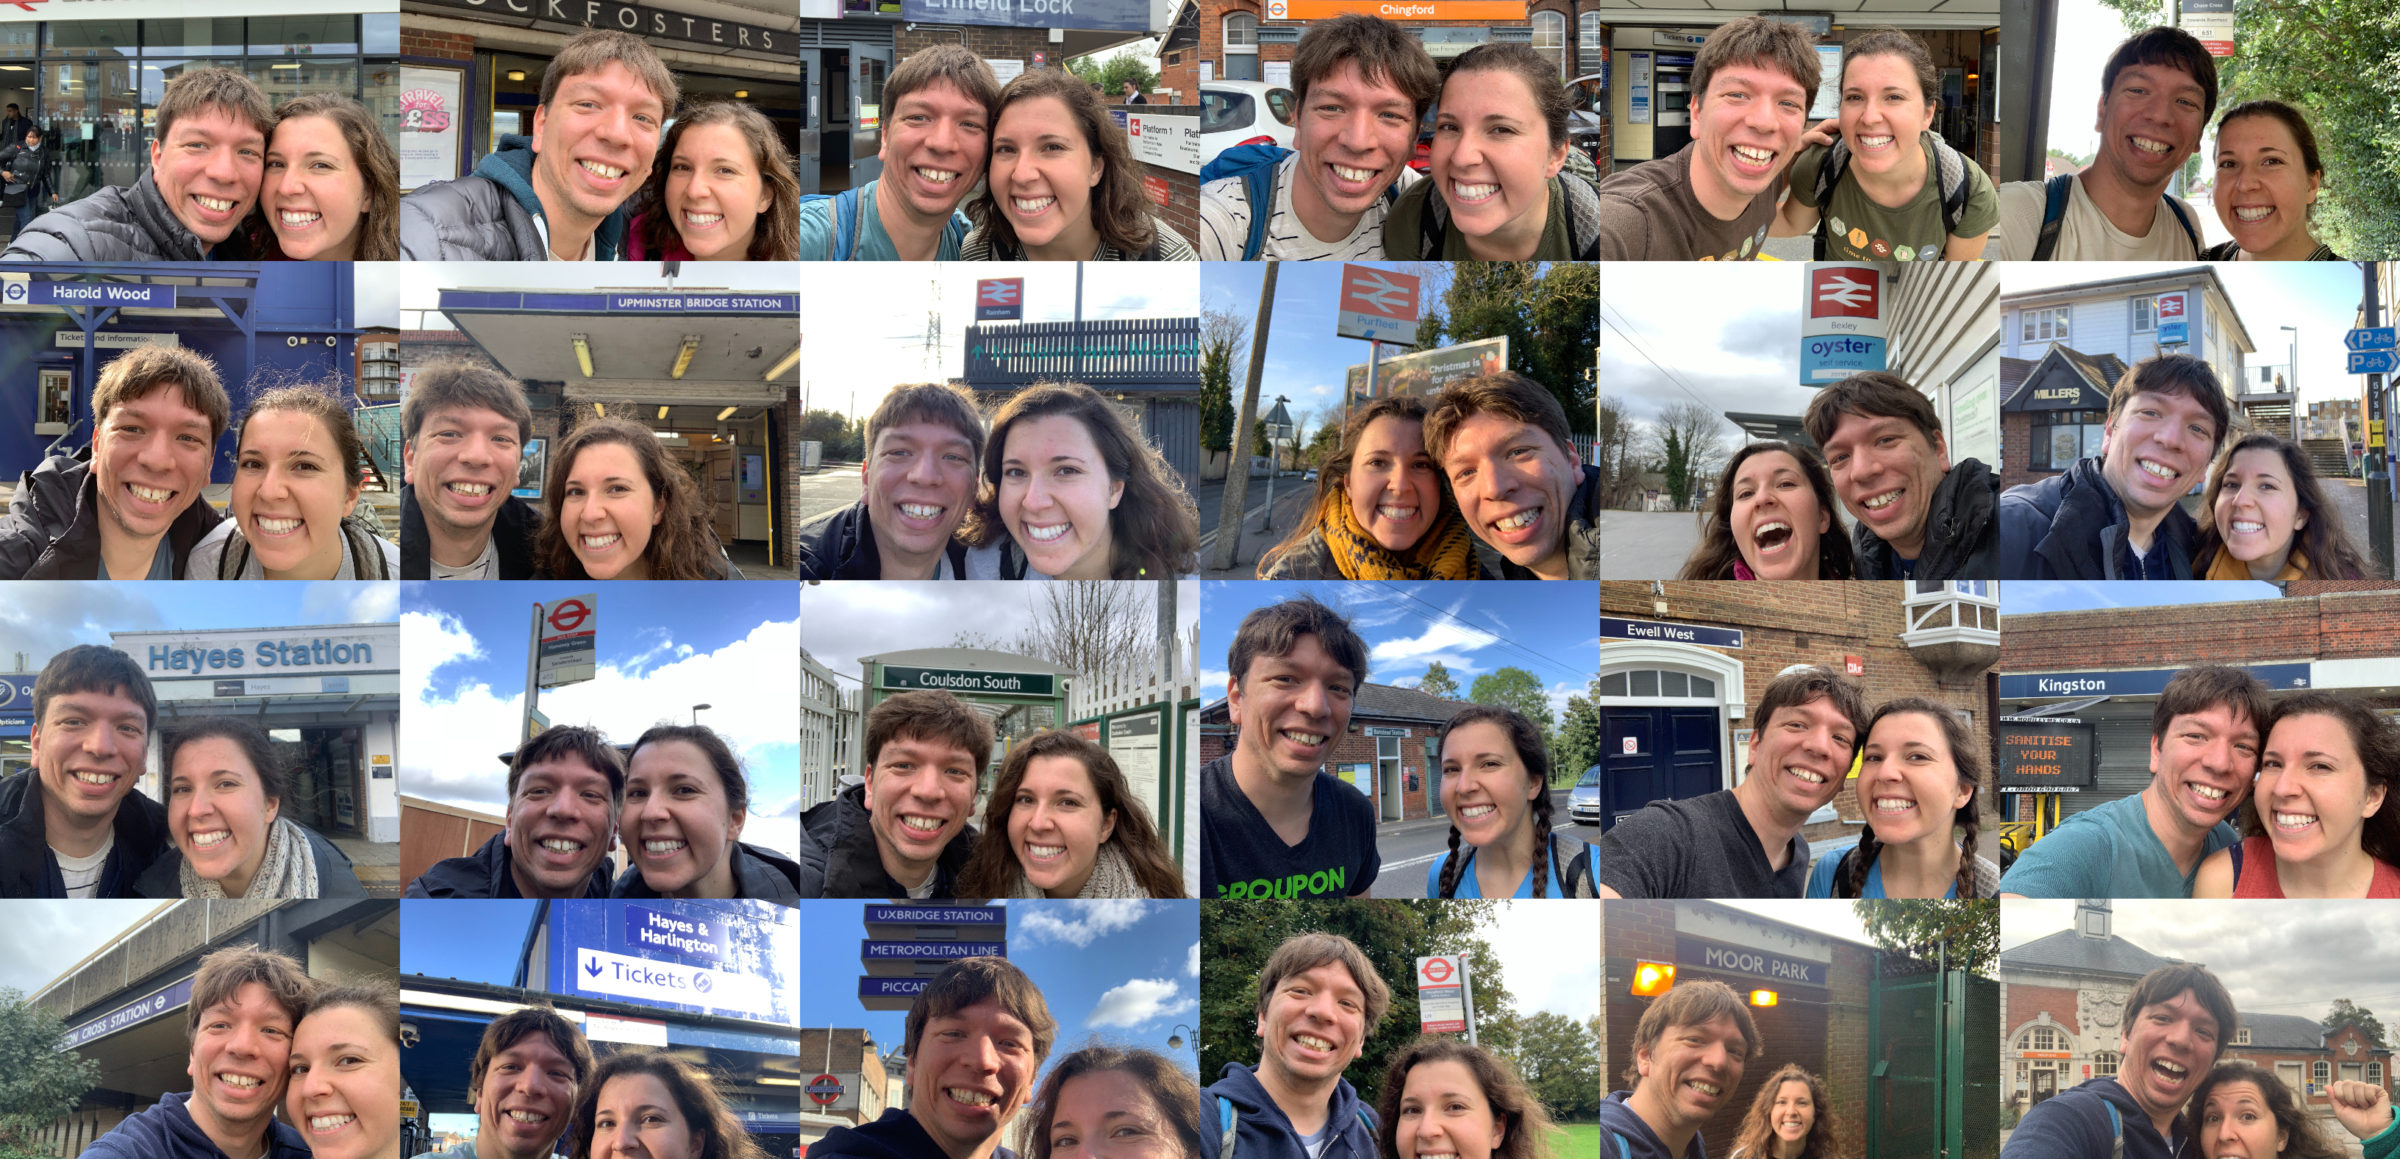 The real purpose of this exercise was to assemble a set of 24 selfies from each section's transport stop